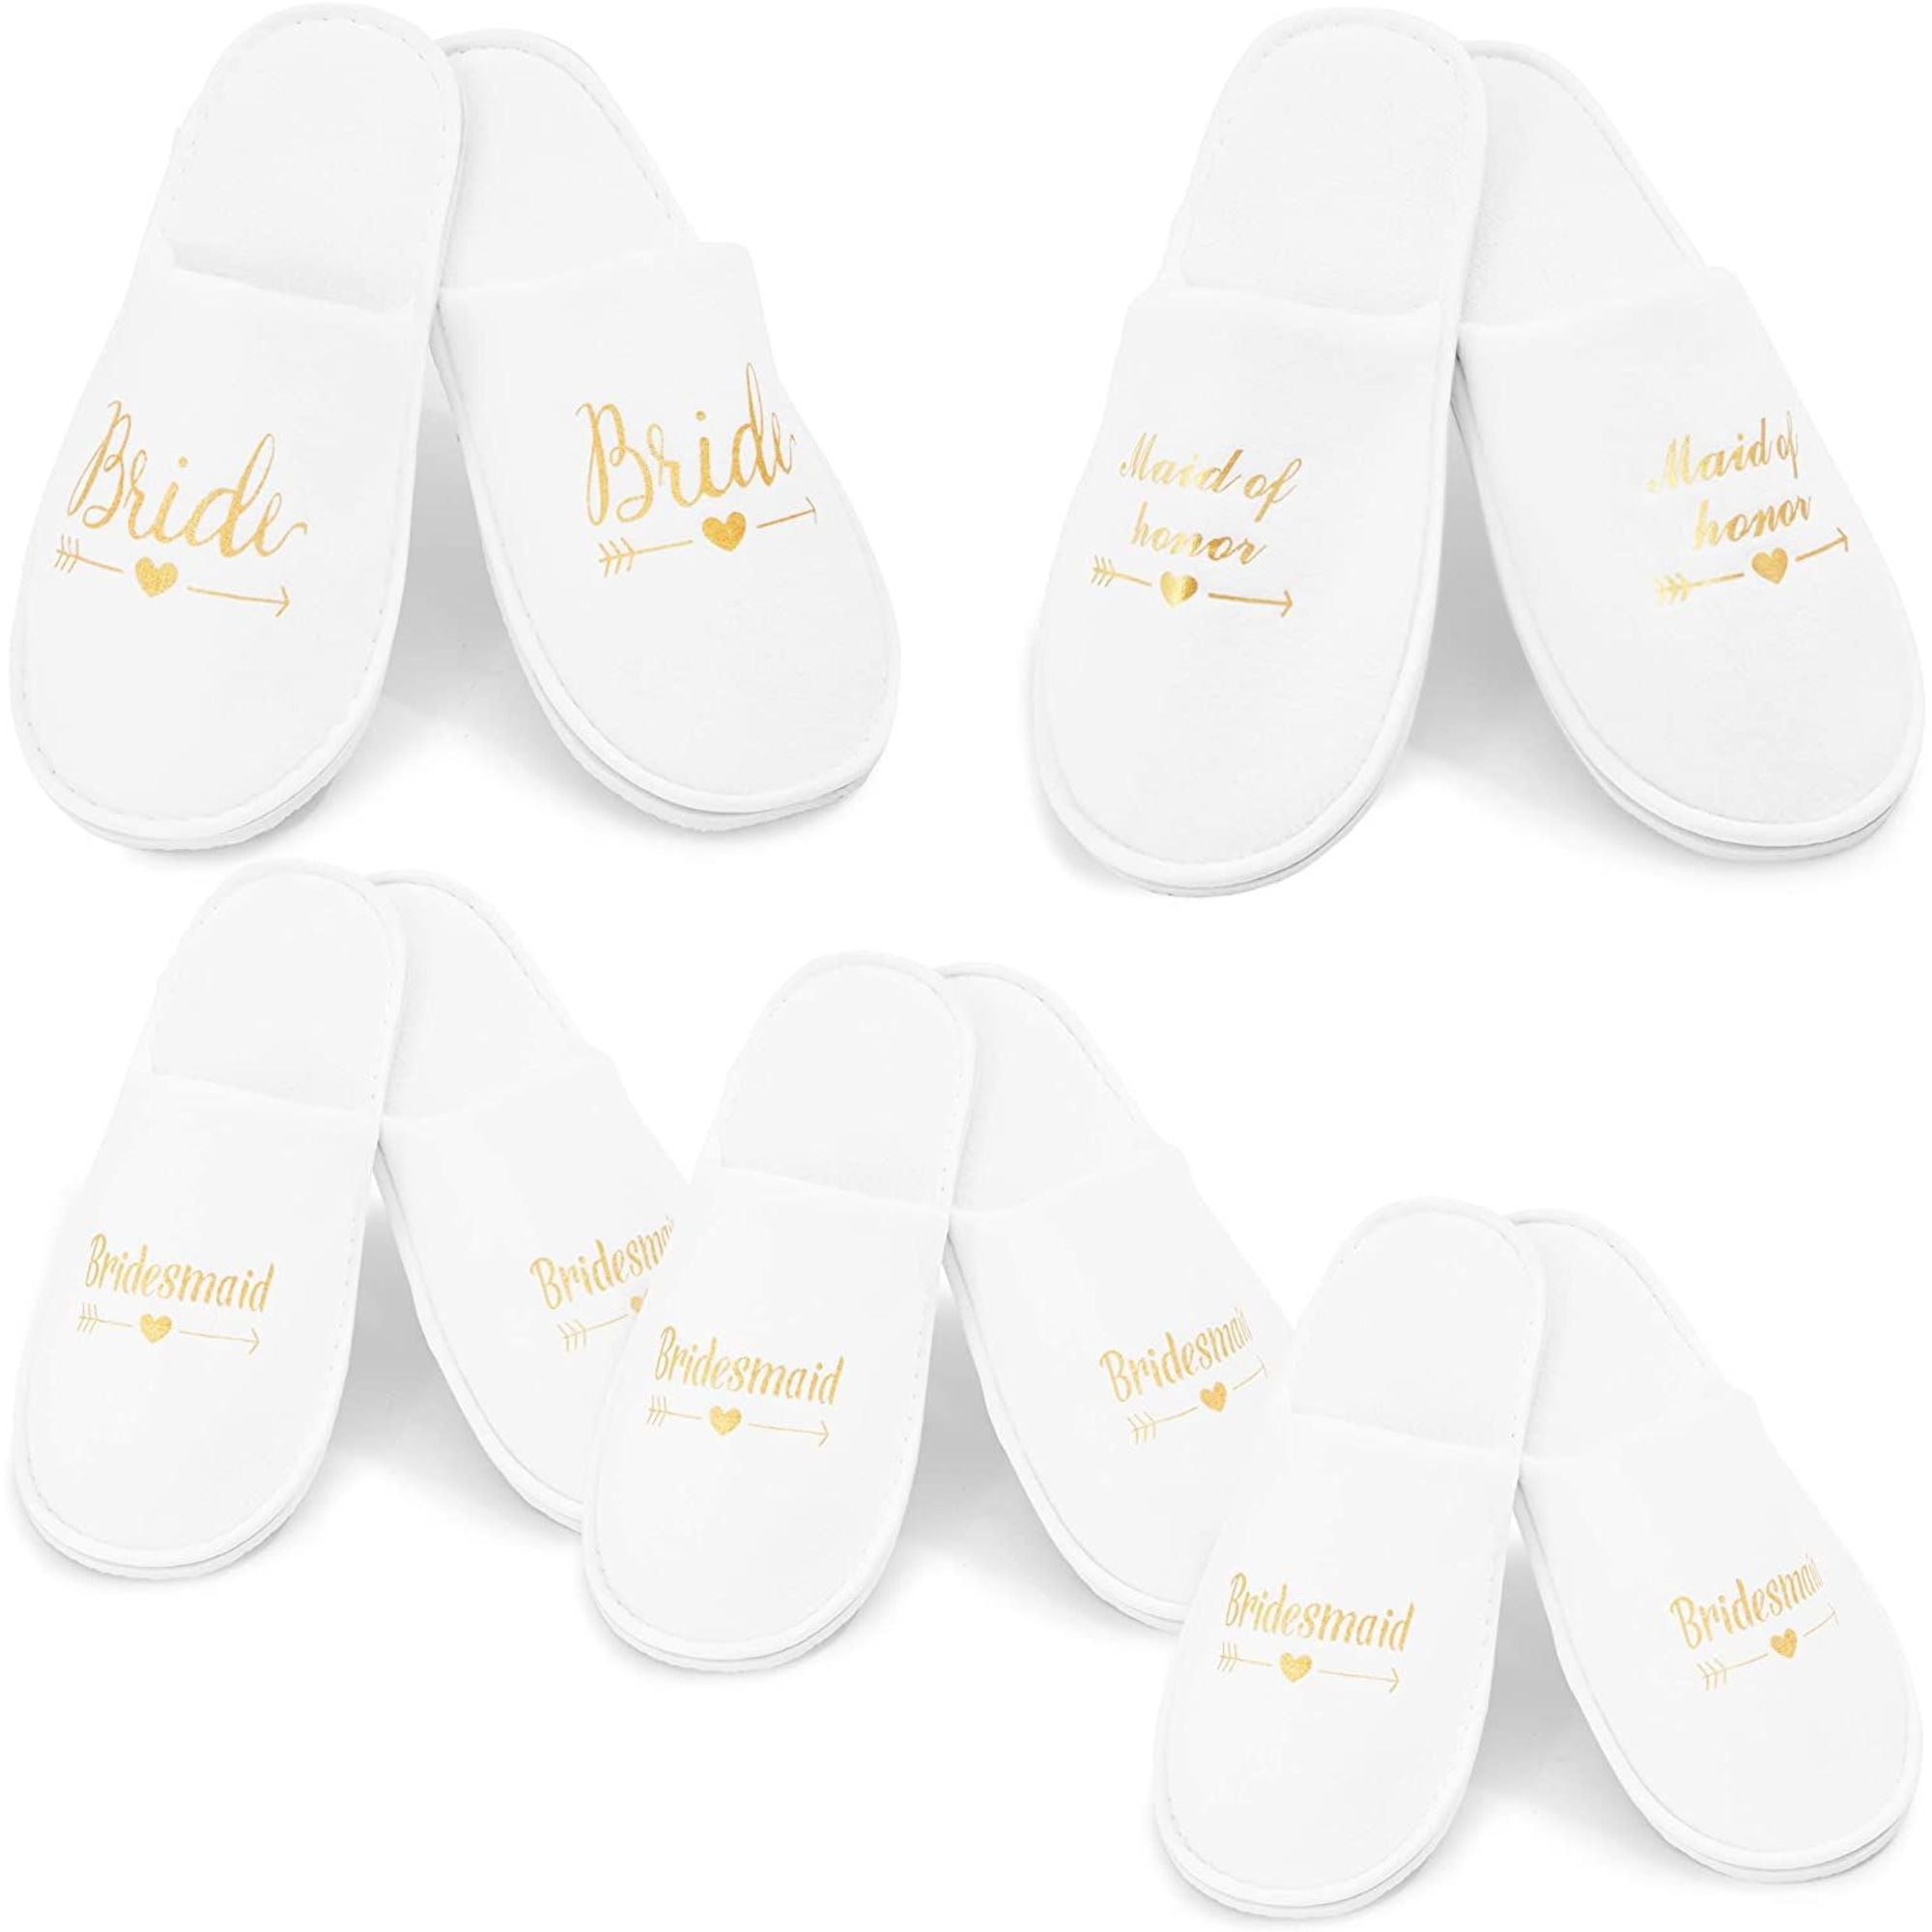 Bride slippers bridal party bridesmaid hen party spa maid of honour gift slipper 